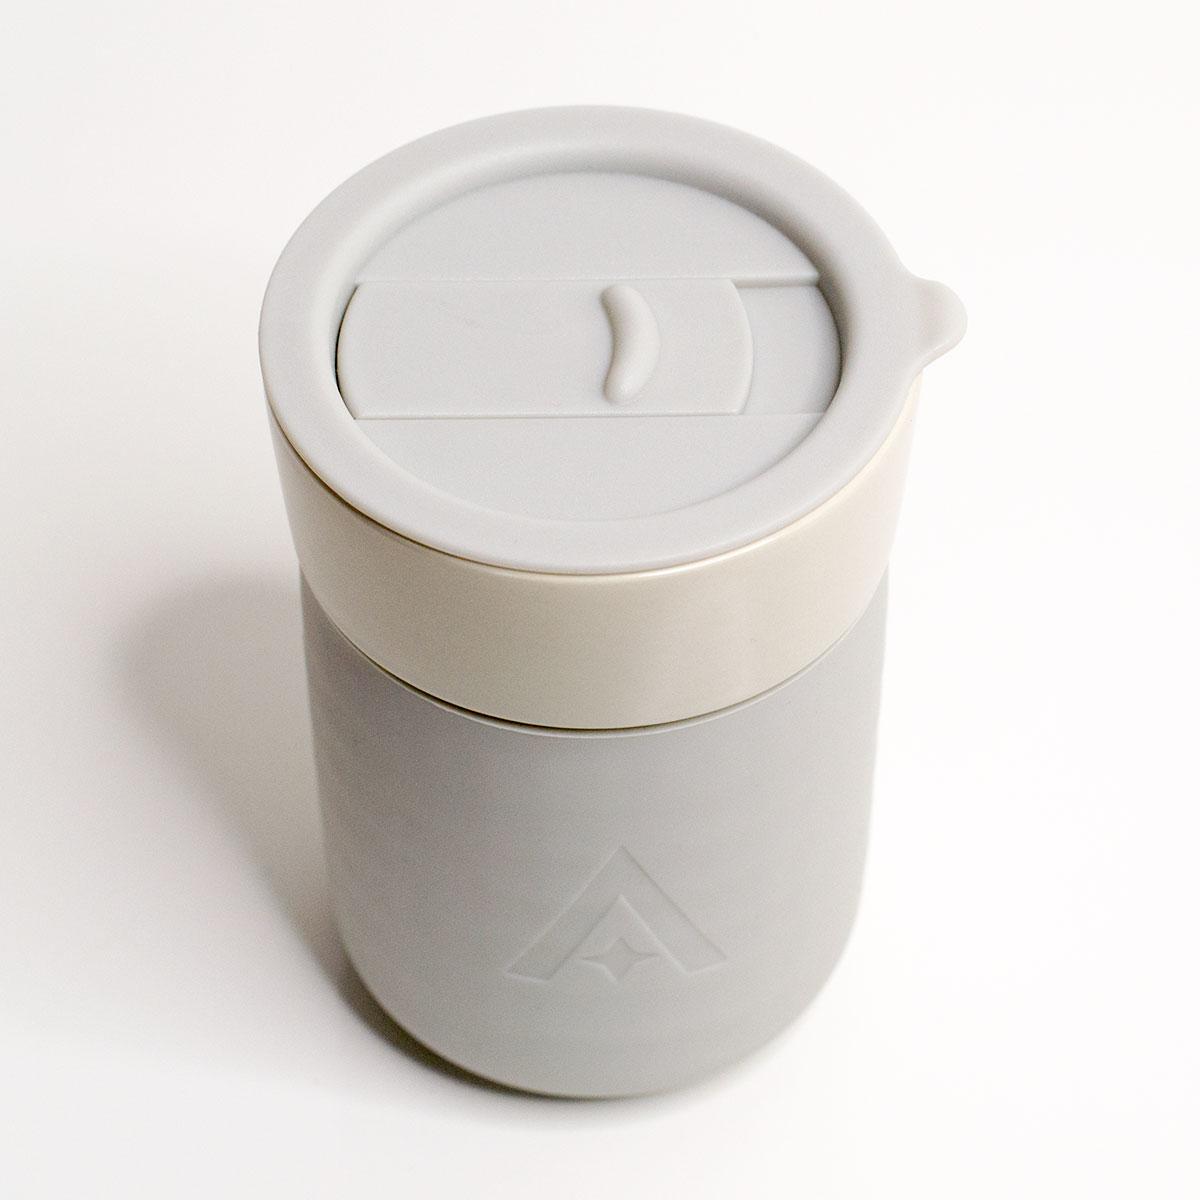 Carry Cup - The Universal Travel Mug by Uberstar (Natural Stone)